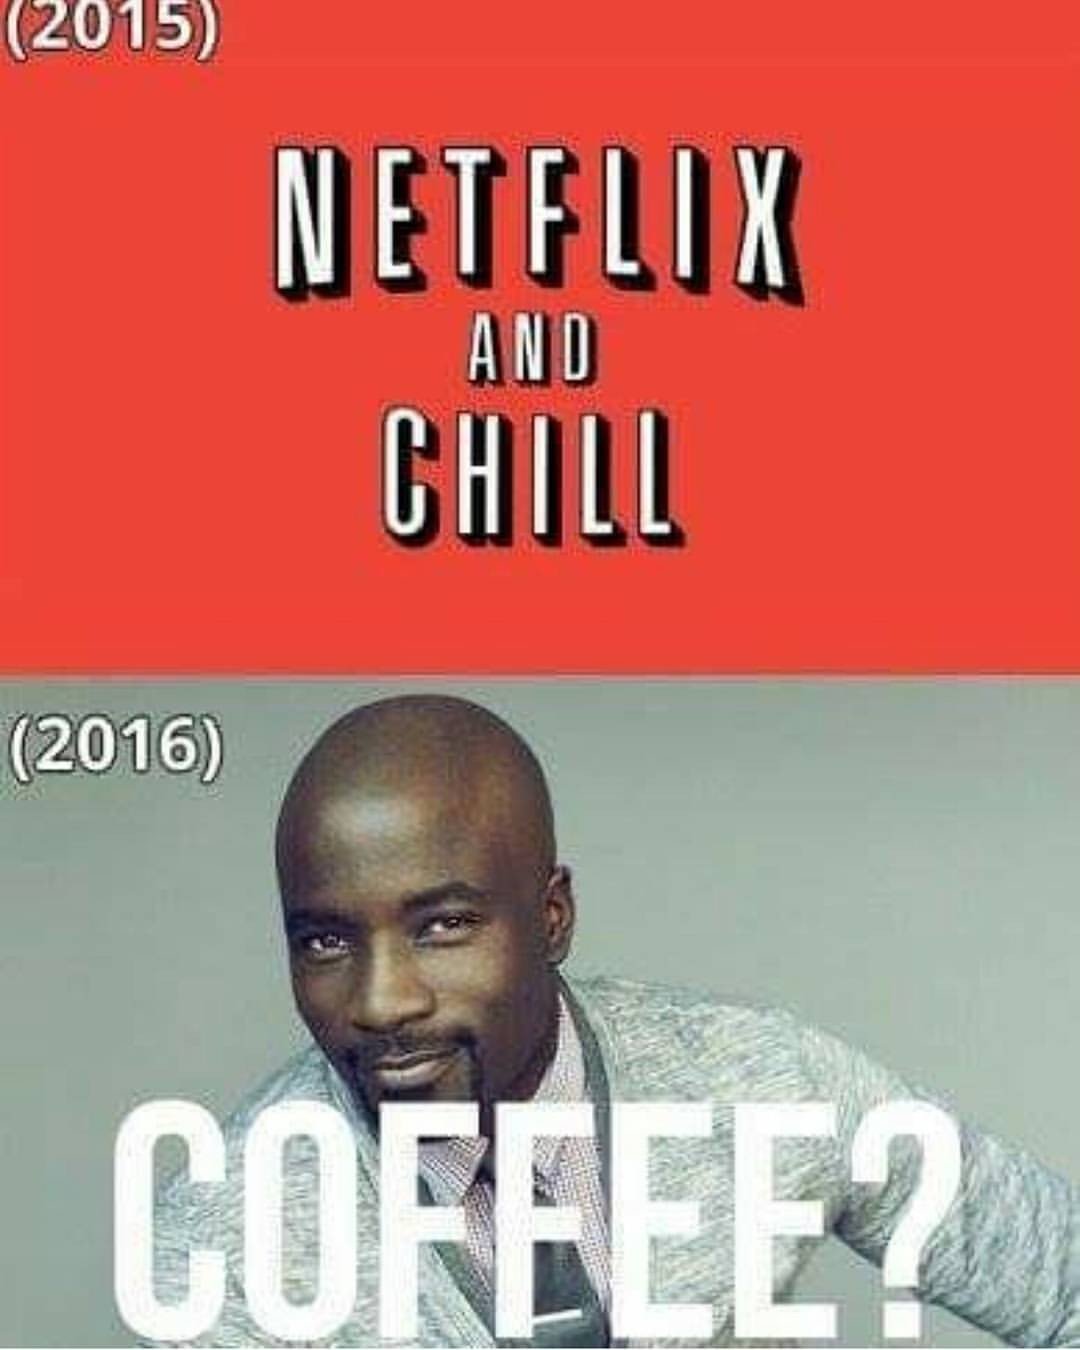 Photo by Mike Hawke with the username @wunhunglow410, who is a verified user,  October 10, 2016 at 8:38 AM and the text says 'Say goodbye to &ldquo;Netflix and Chill&rdquo; and hello to &ldquo;You wanna come up for coffee&rdquo; Luke Cage seal of approval. Besides that&rsquo;s how you use to initiated sex before Netflix came along. 
#realtalk #lukecage #funnyshit..'